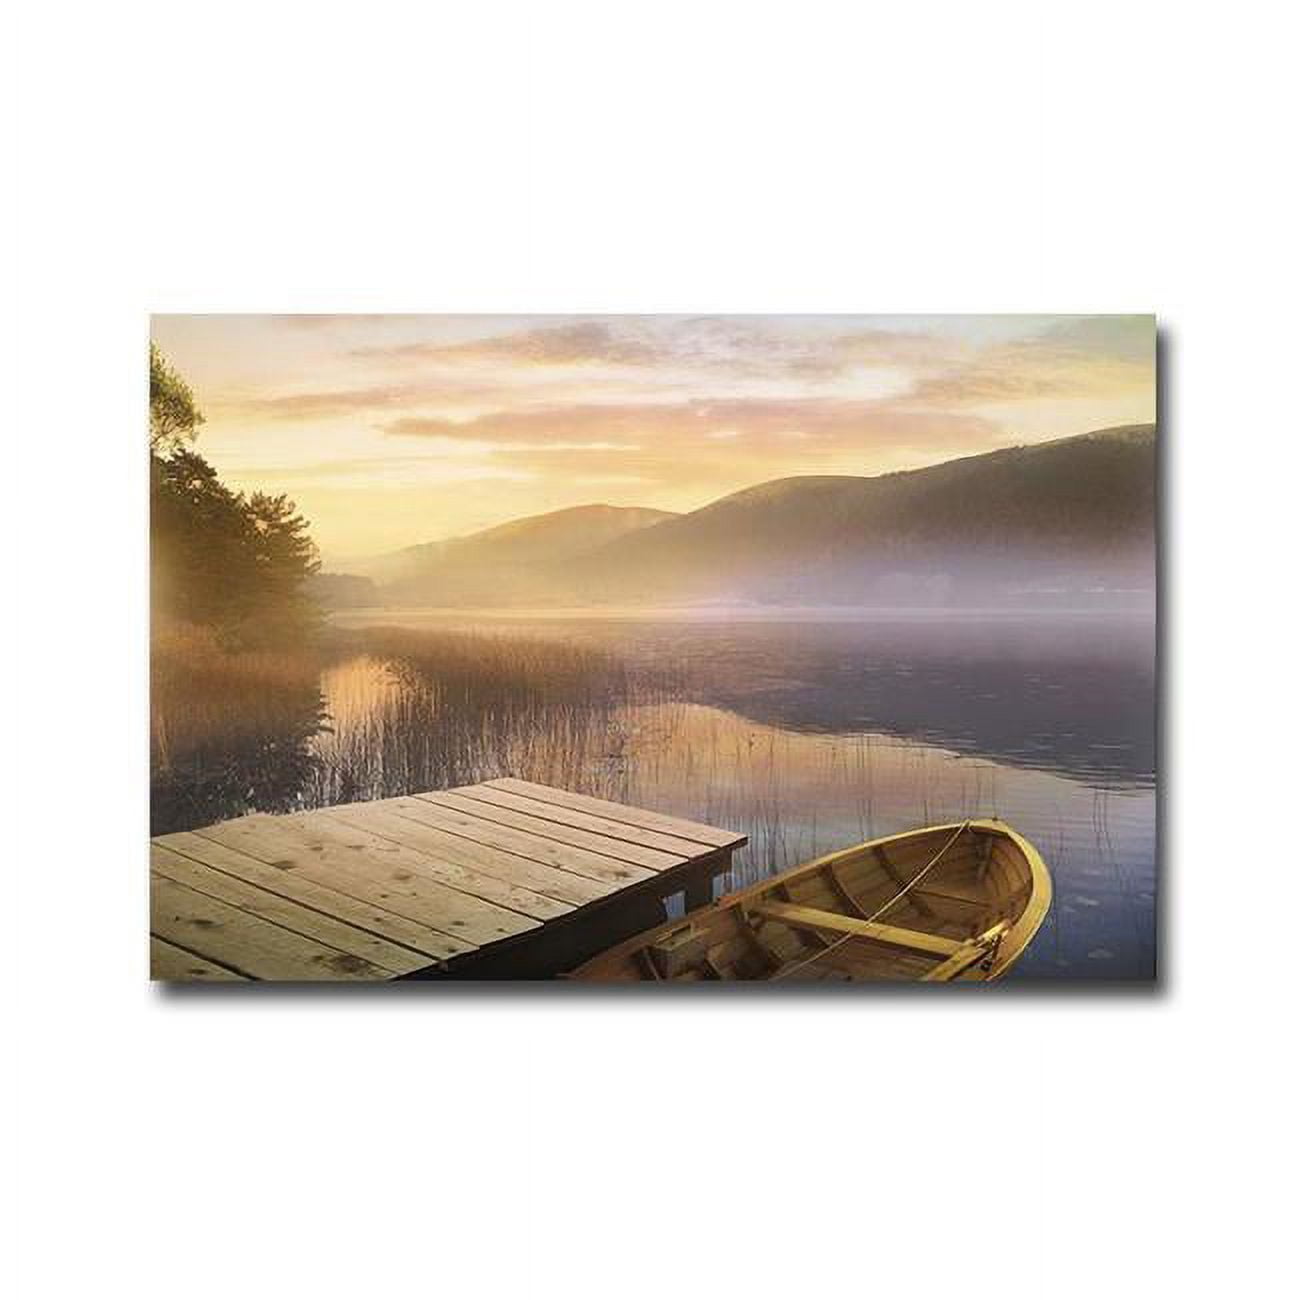 1218o454eg Morning On The Lake By Yaming Hu Premium Gallery-wrapped Canvas Giclee Art - Ready-to-hang, 12 X 18 X 1.5 In.